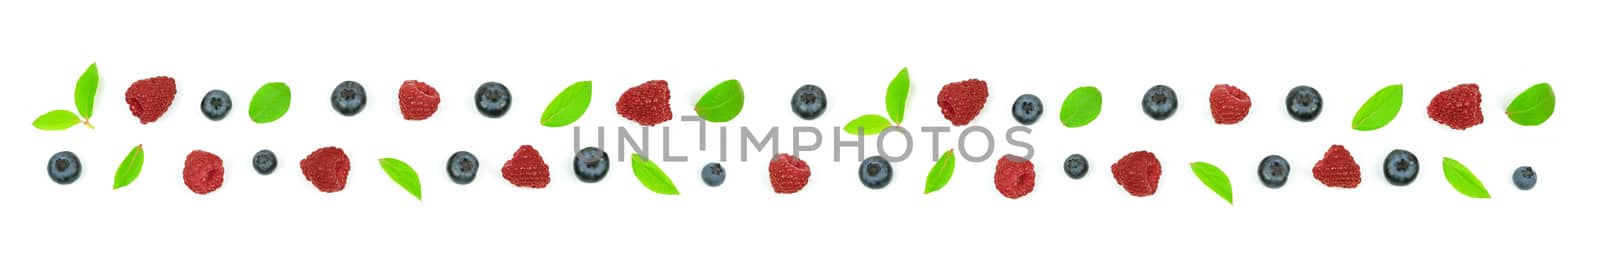 Top view of a forest fruits long ornament with blueberry, leaves and a raspberry.